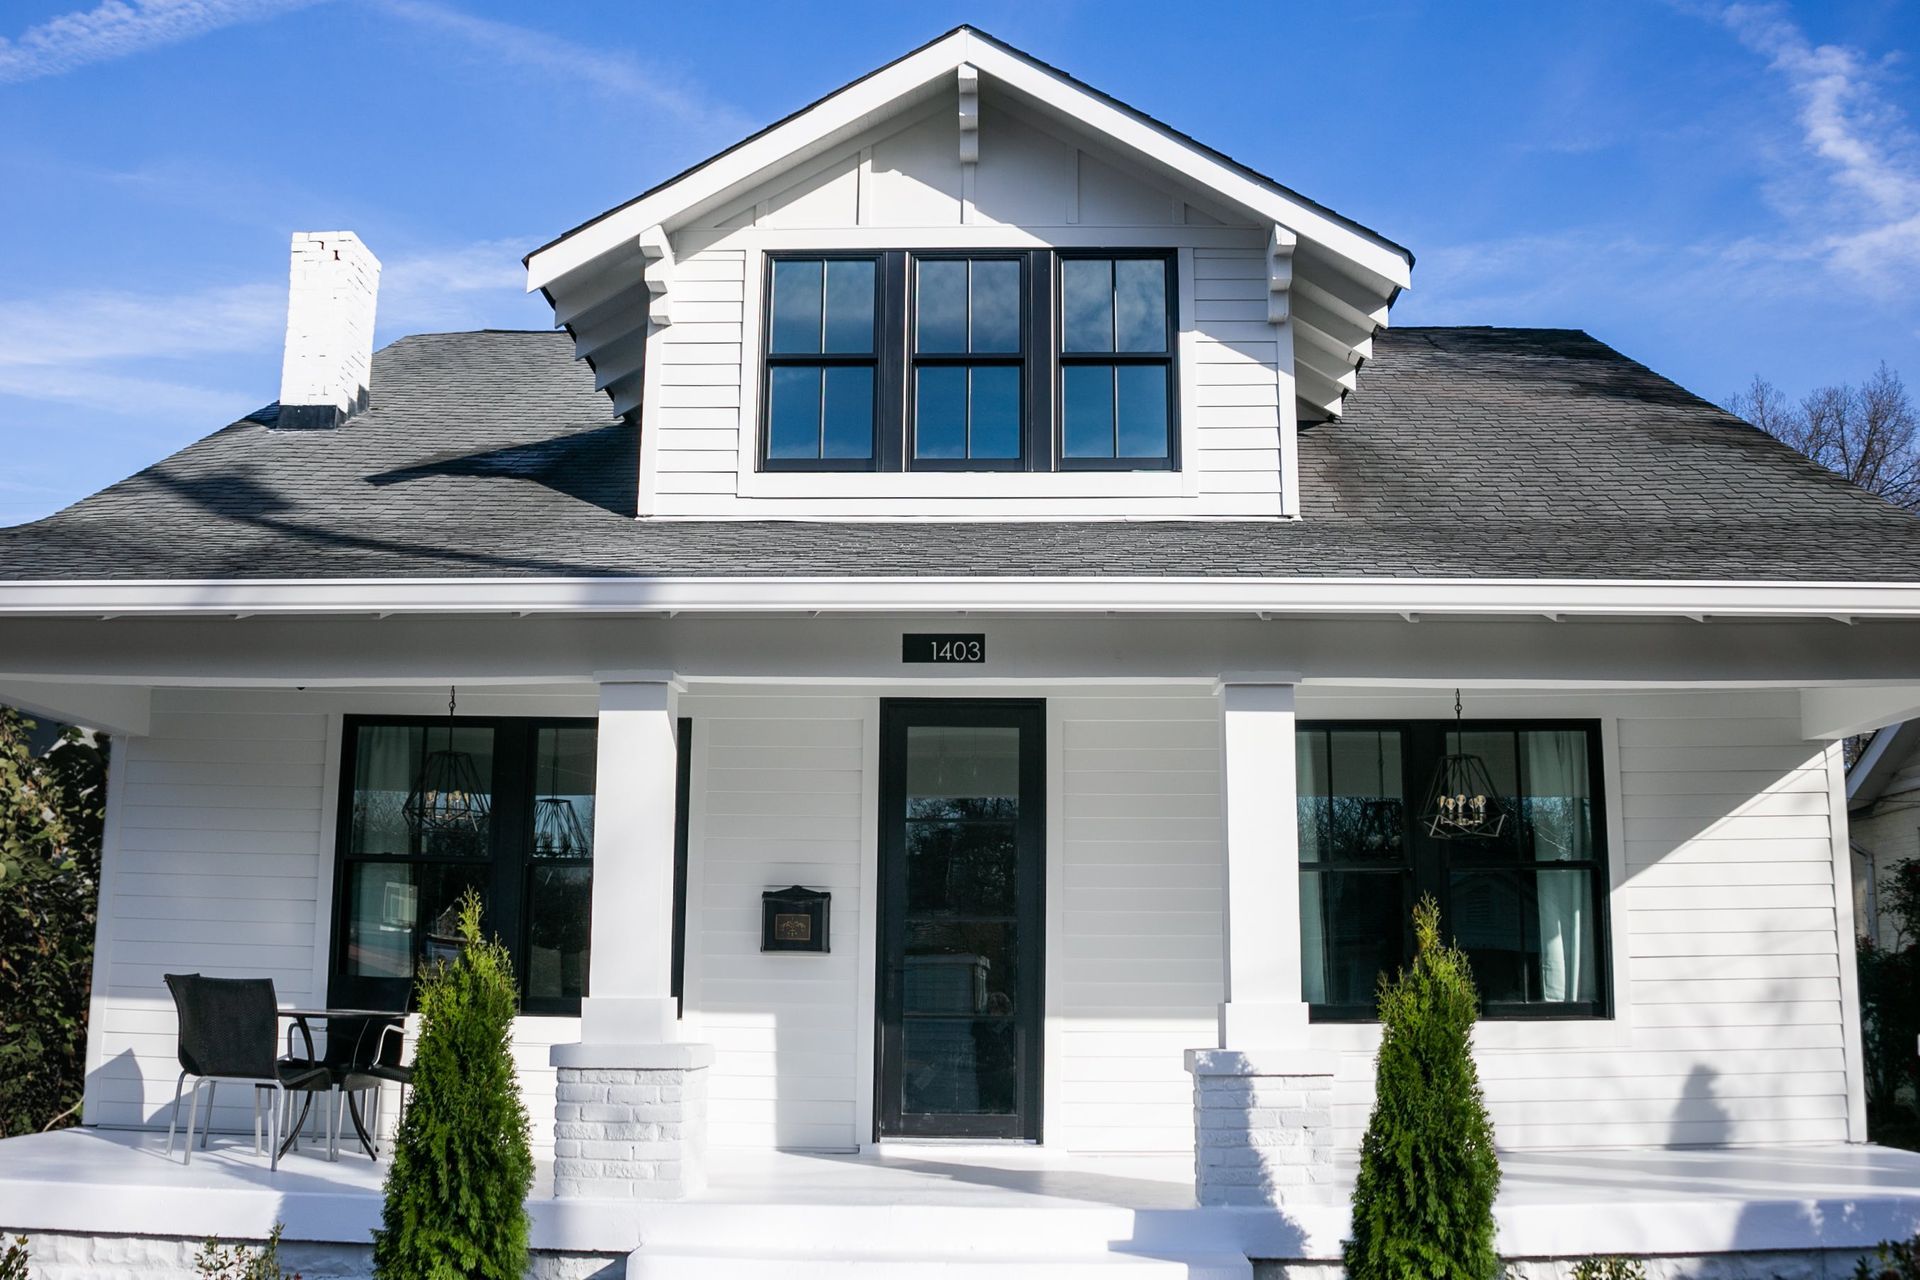 Elevate Your Home's Exterior with LP SmartSide Siding: Home Run Improvement 